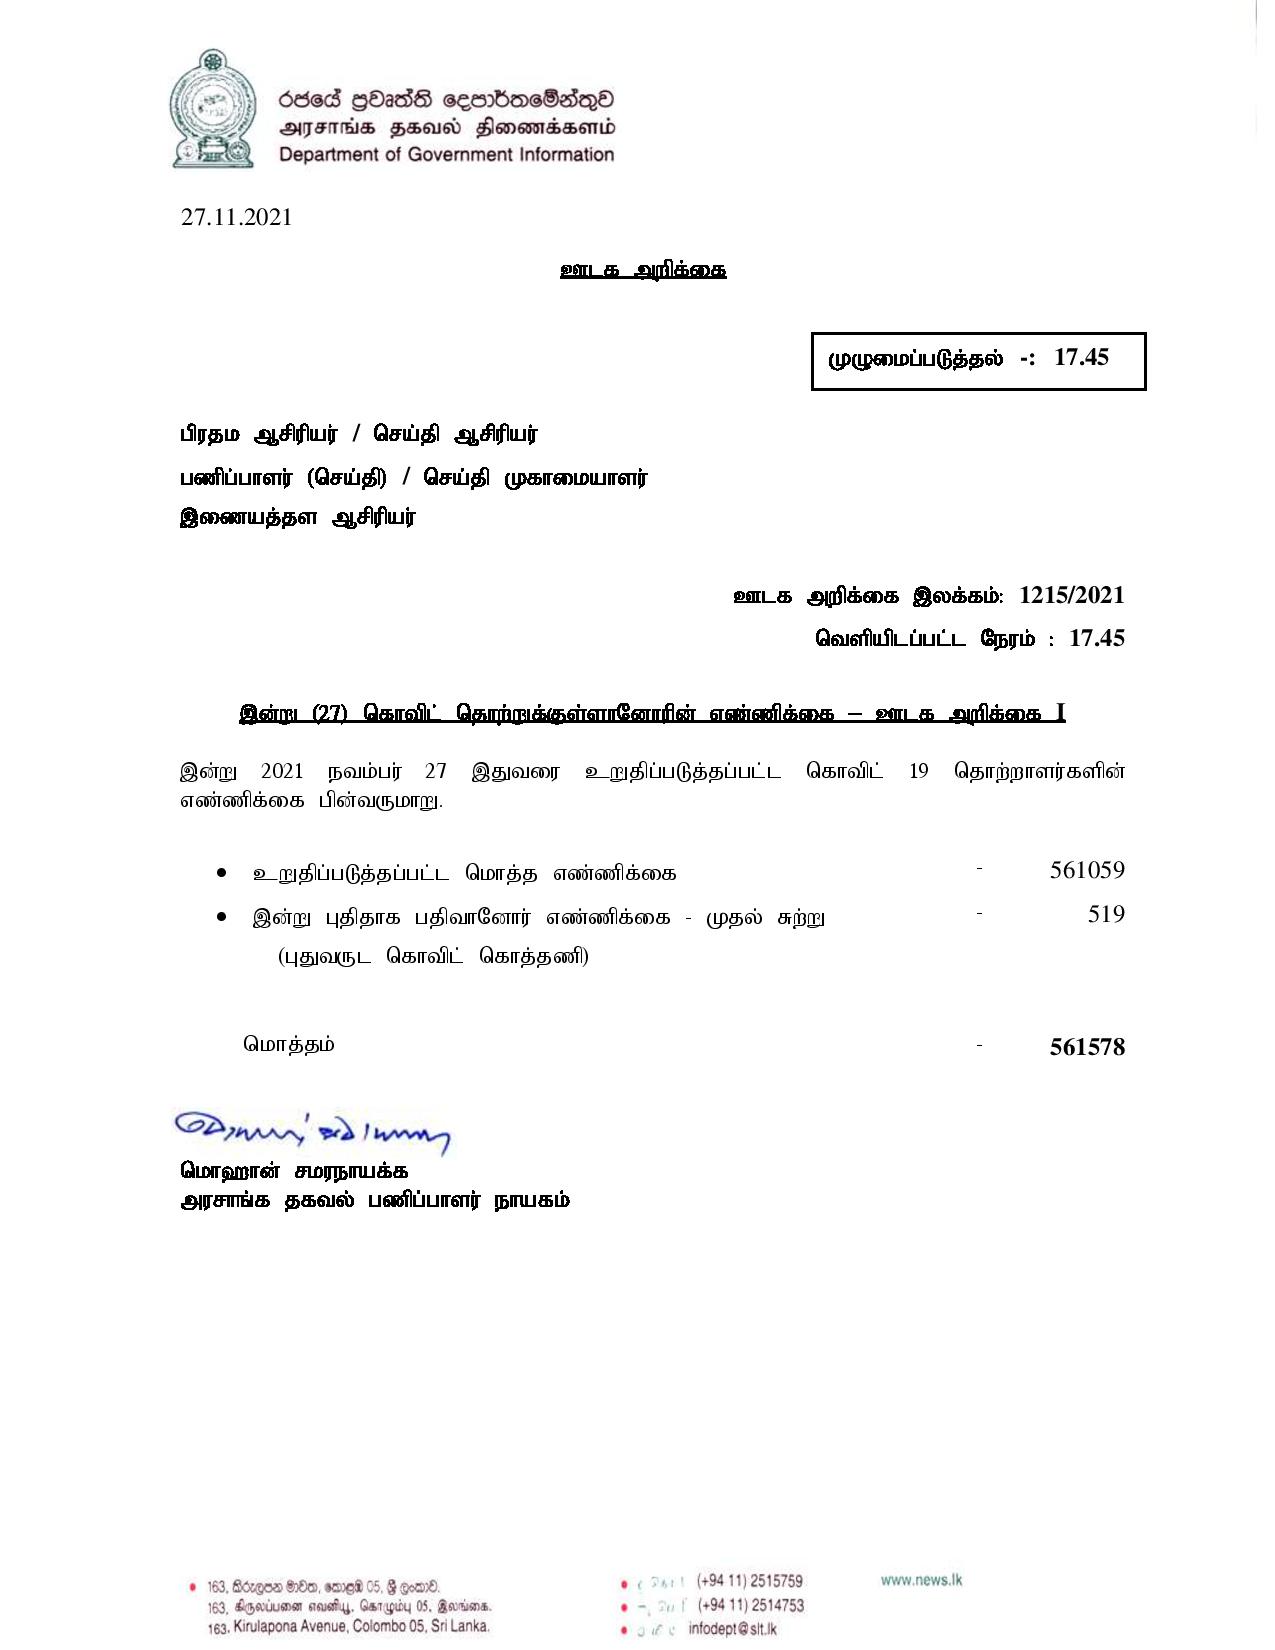 Release No 1215 Tamil page 001